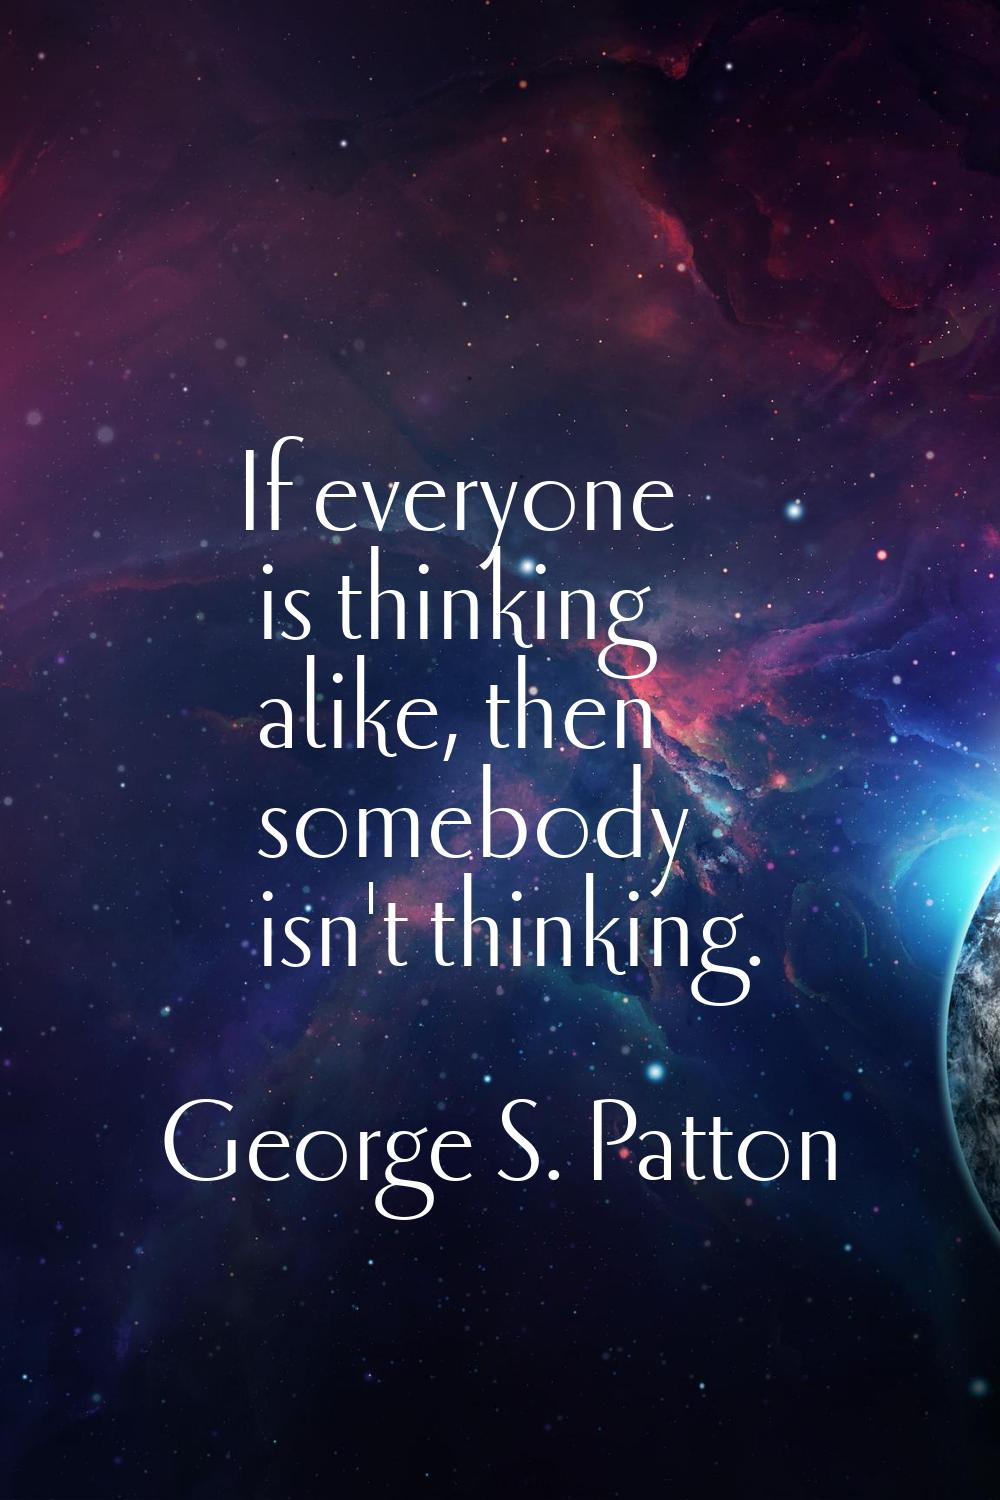 If everyone is thinking alike, then somebody isn't thinking.